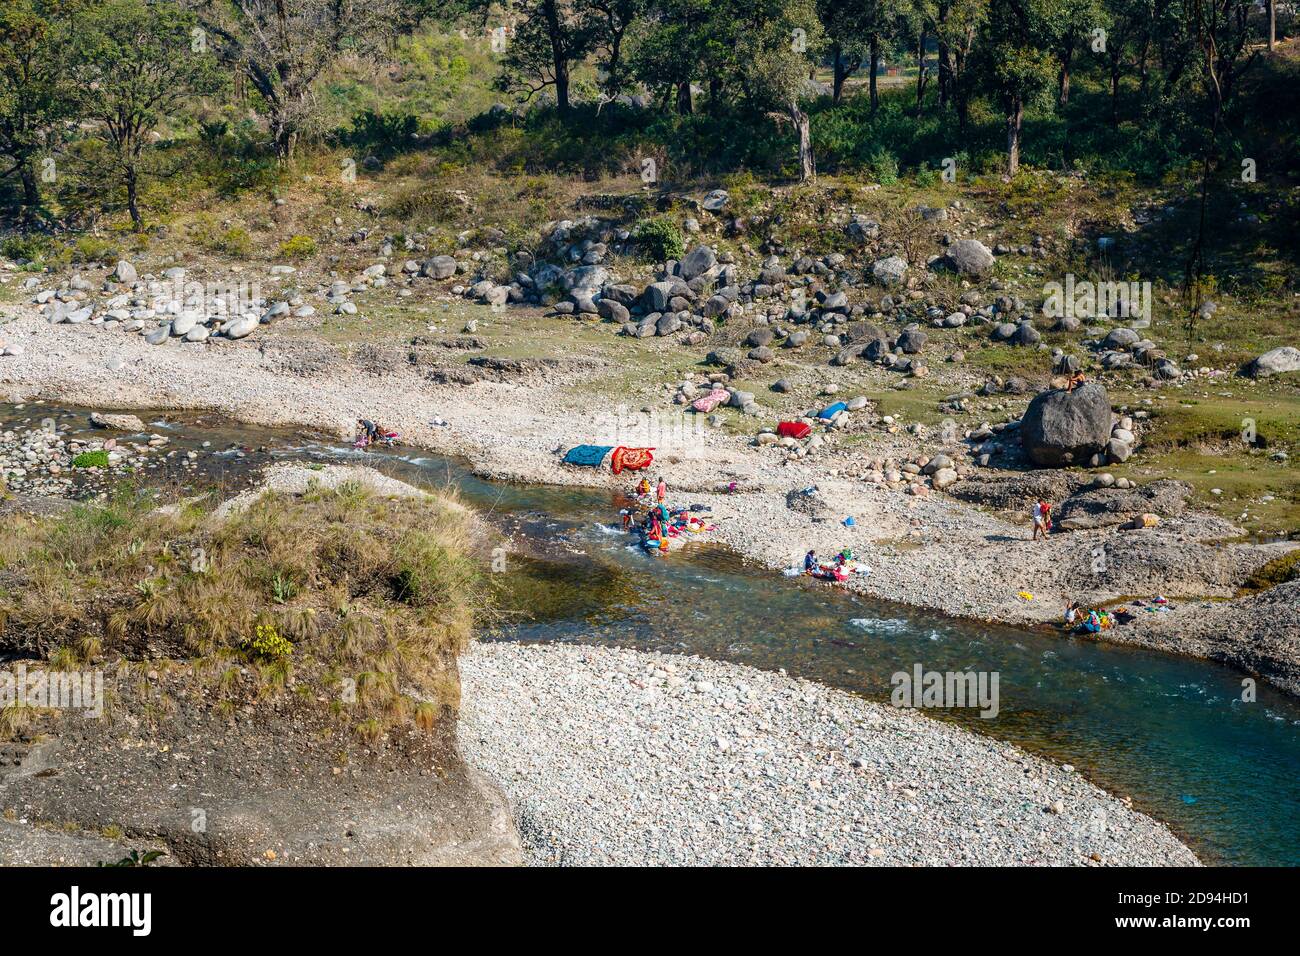 Gorge with local people washing and drying clothes on the side of a river in Kaswara, near Old Kangra and Kangra Fort in Himachal Pradesh, north India Stock Photo